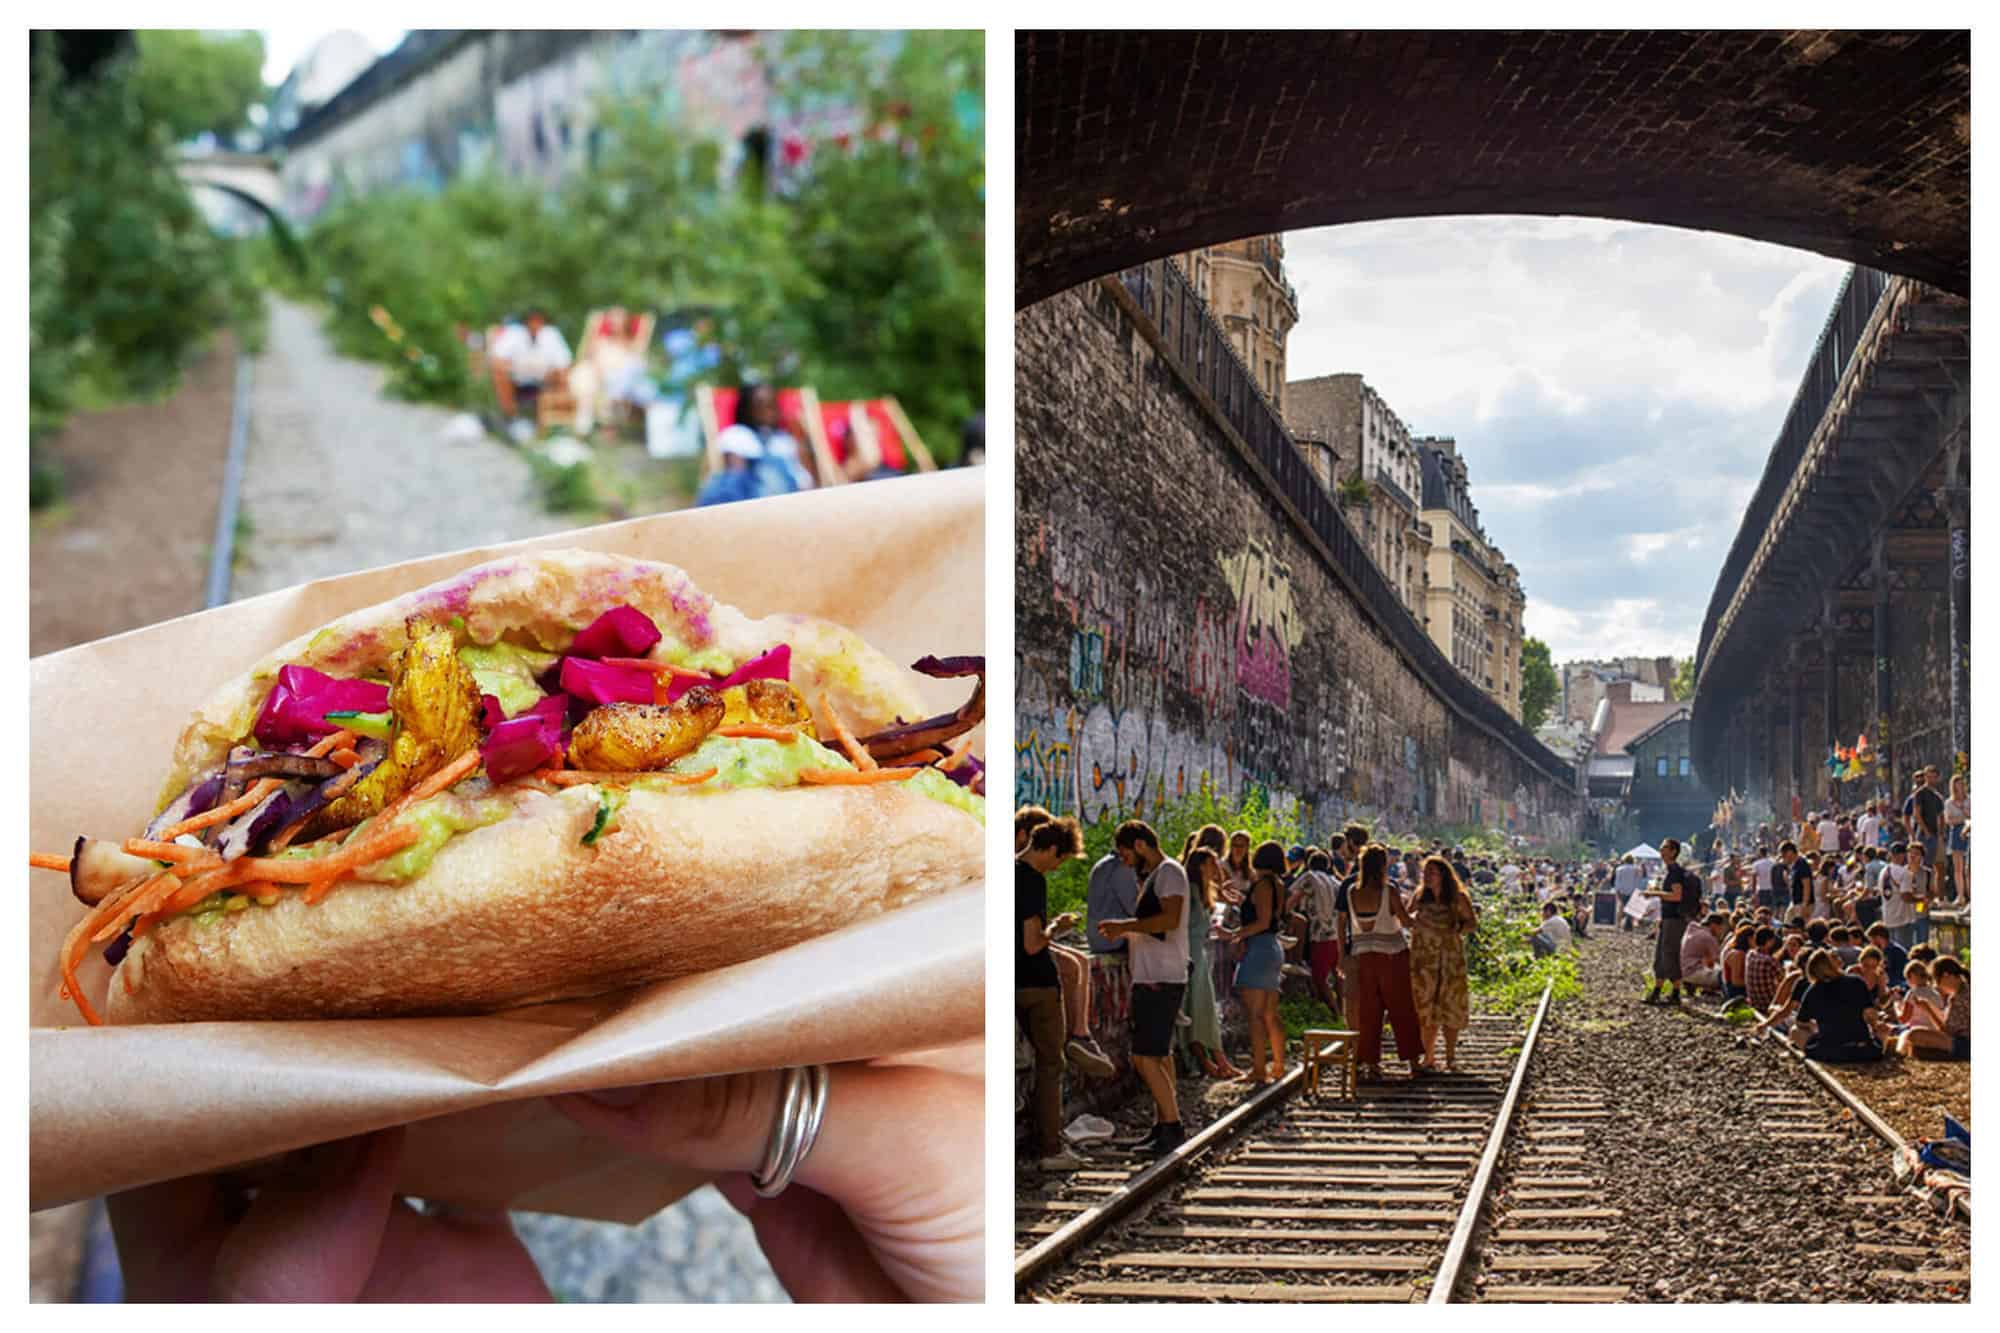 Left: A close up image of a person holding a vegetarian burger at a bar on railway tracks - Le Hasard Ludique. Right: A photo of bar-goers drinking during the day at a bar on railway tracks - Le Hasard Ludique.